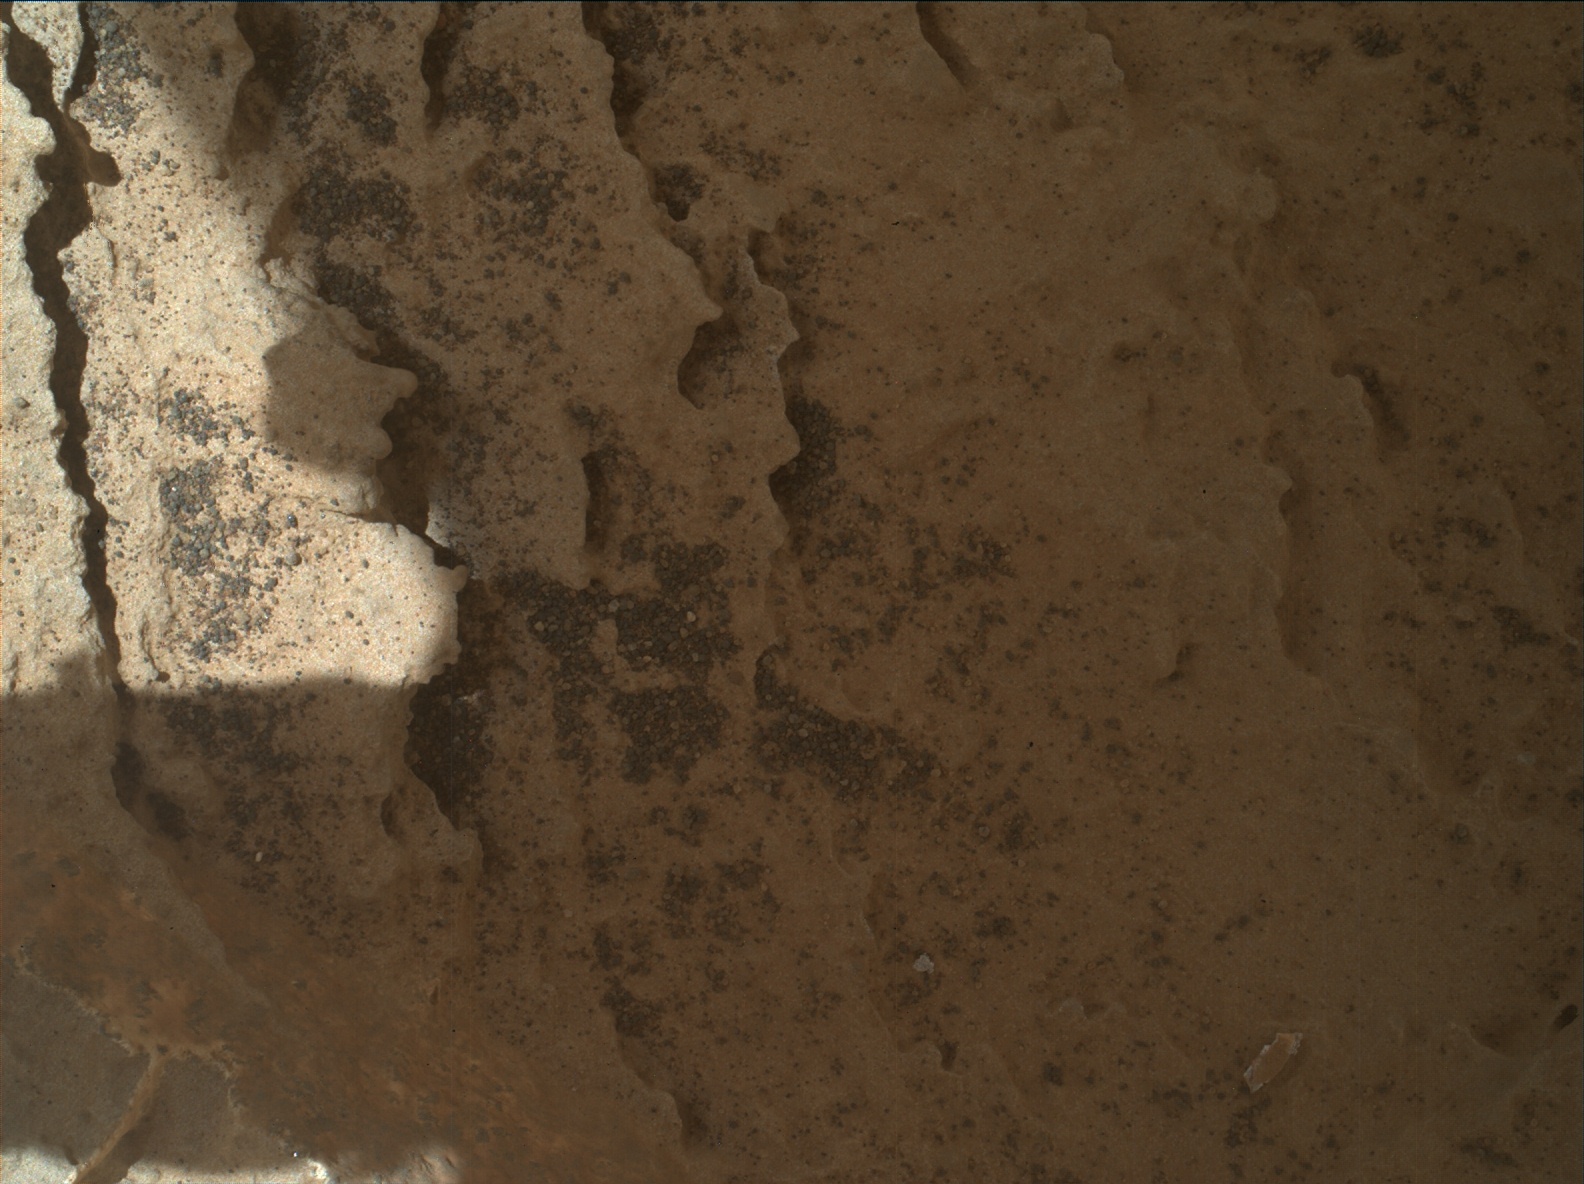 Nasa's Mars rover Curiosity acquired this image using its Mars Hand Lens Imager (MAHLI) on Sol 2659